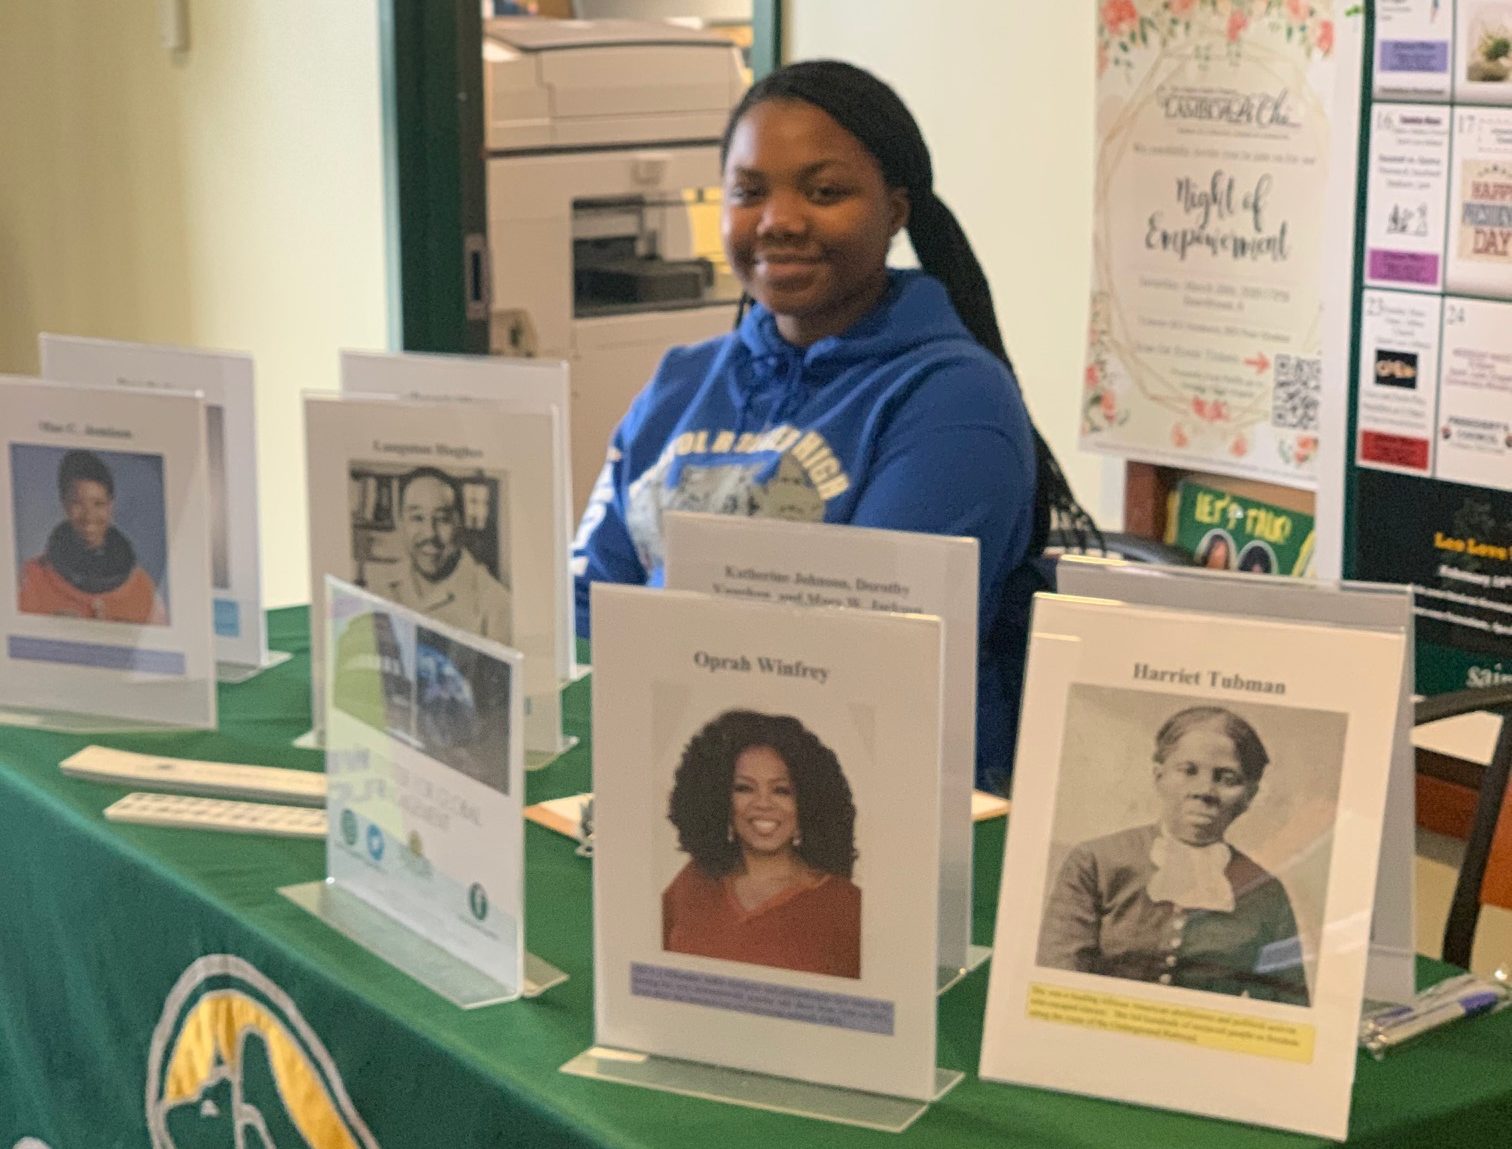 Saint Leo showed their appreciation for black history month by demonstrating to student’s important figures in history.